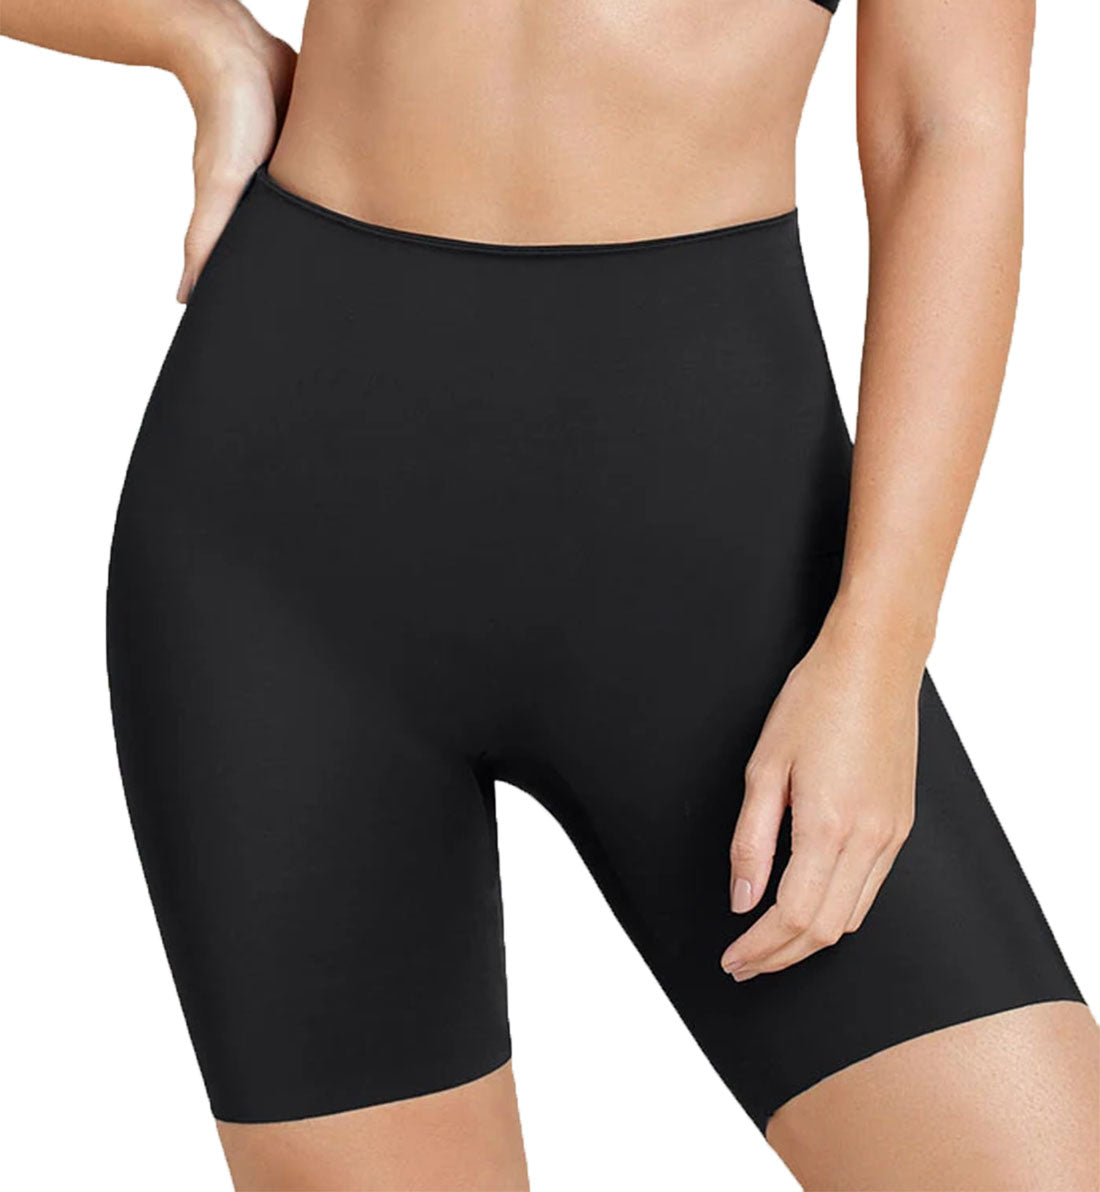 Buy Undetectable Padded Butt Lifter Shaper Short - Order Shapwear